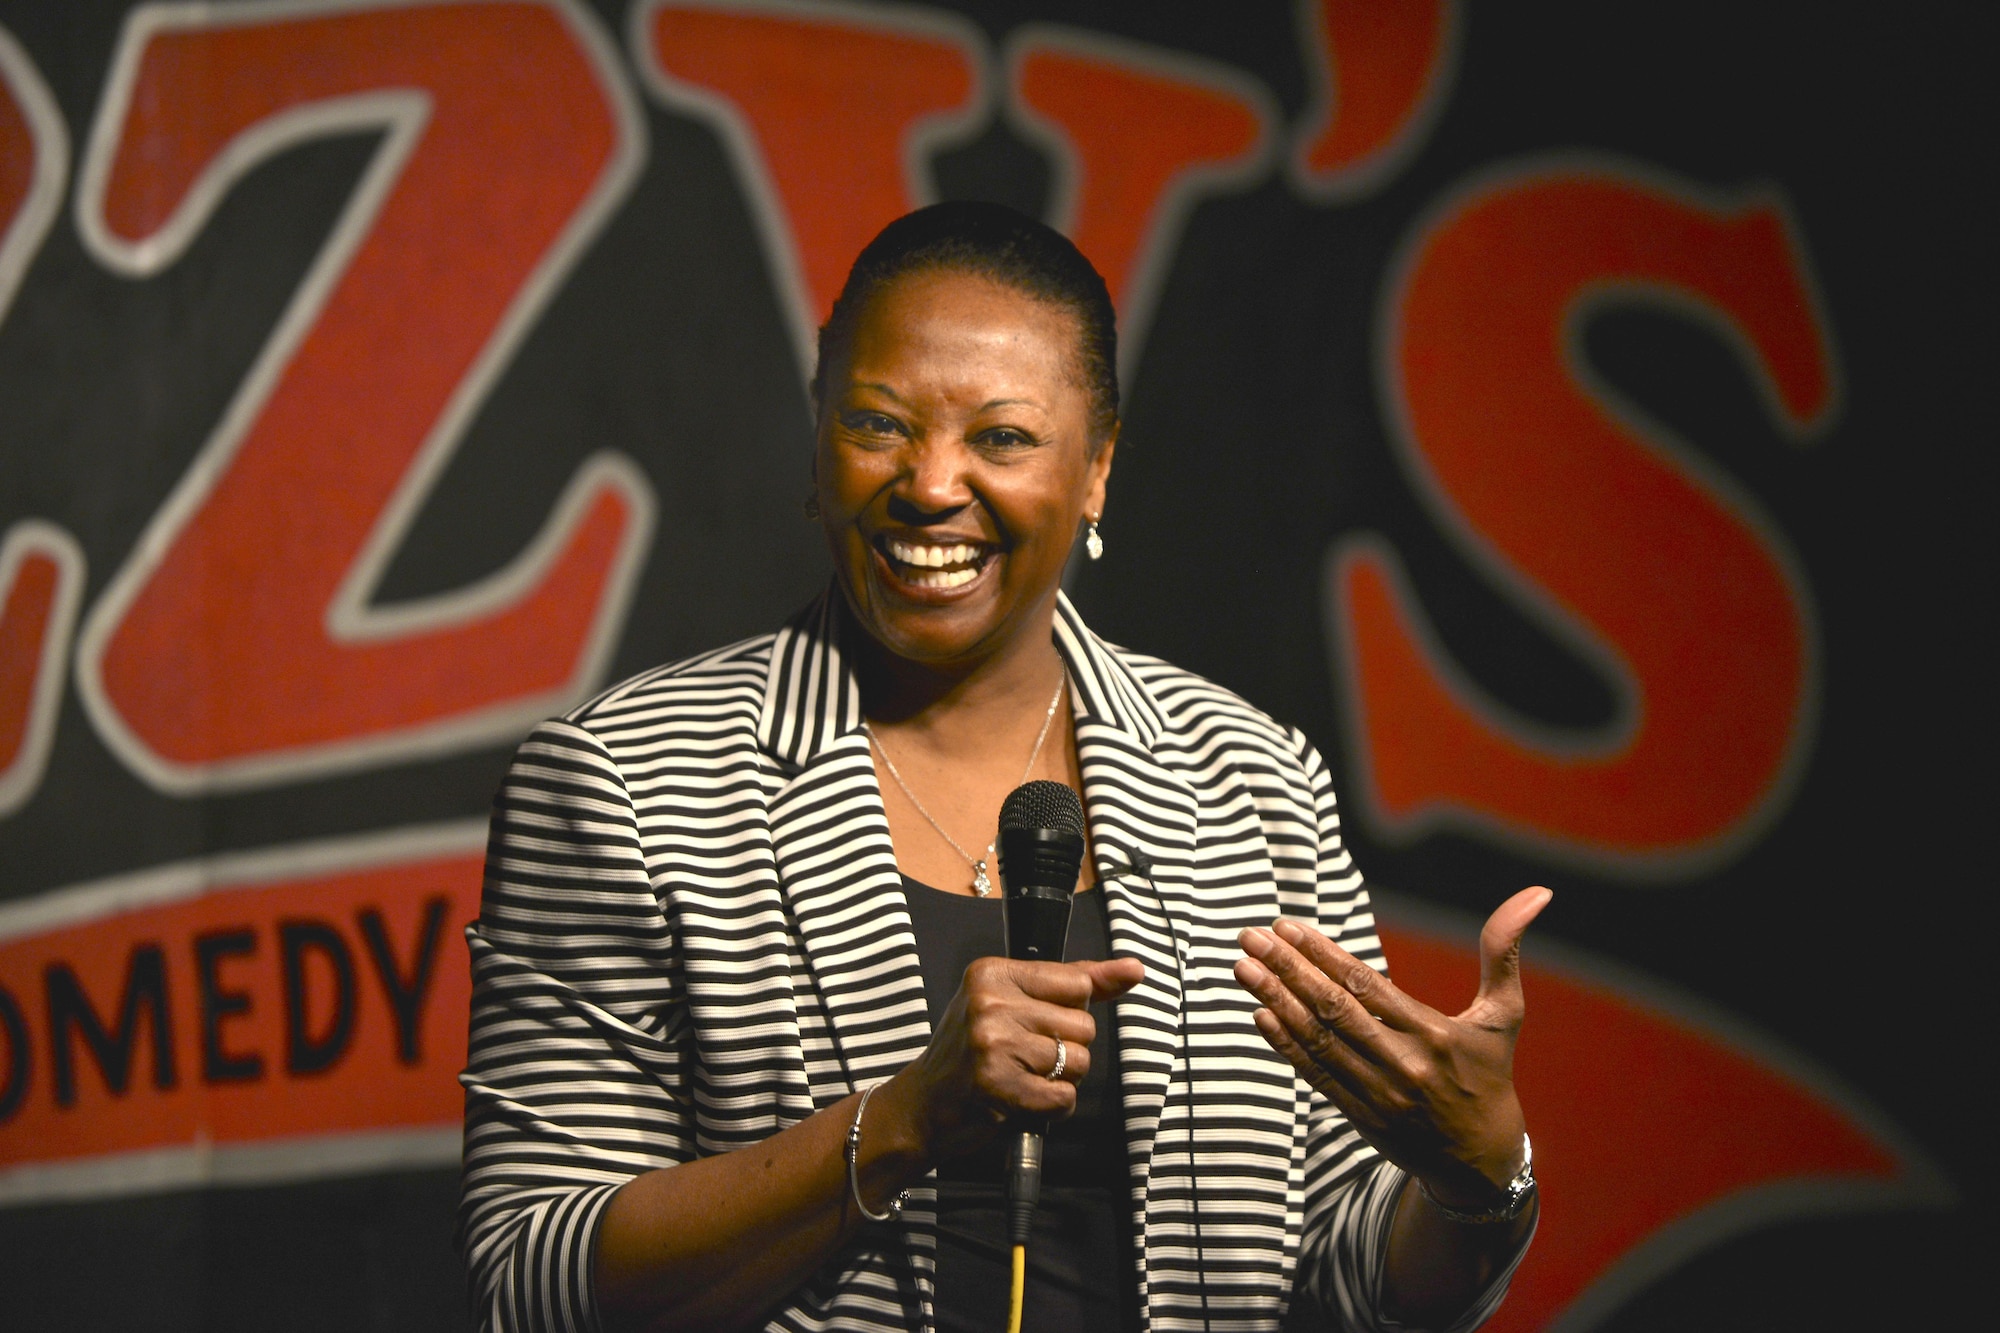 Retired Maj. Darlean Basuedayva, a health promotion officer for the U.S. Army Public Health Center, performs a comedy routine at a club in Newport News, Va., April 14, 2016. Basuedayva’s performance was part of the Armed Services Arts Partnership, which provides military service members and veterans the opportunity to learn artistic skills from artists, art organizations and art students. (U.S. Air Force photo/Staff Sgt. Natasha Stannard)